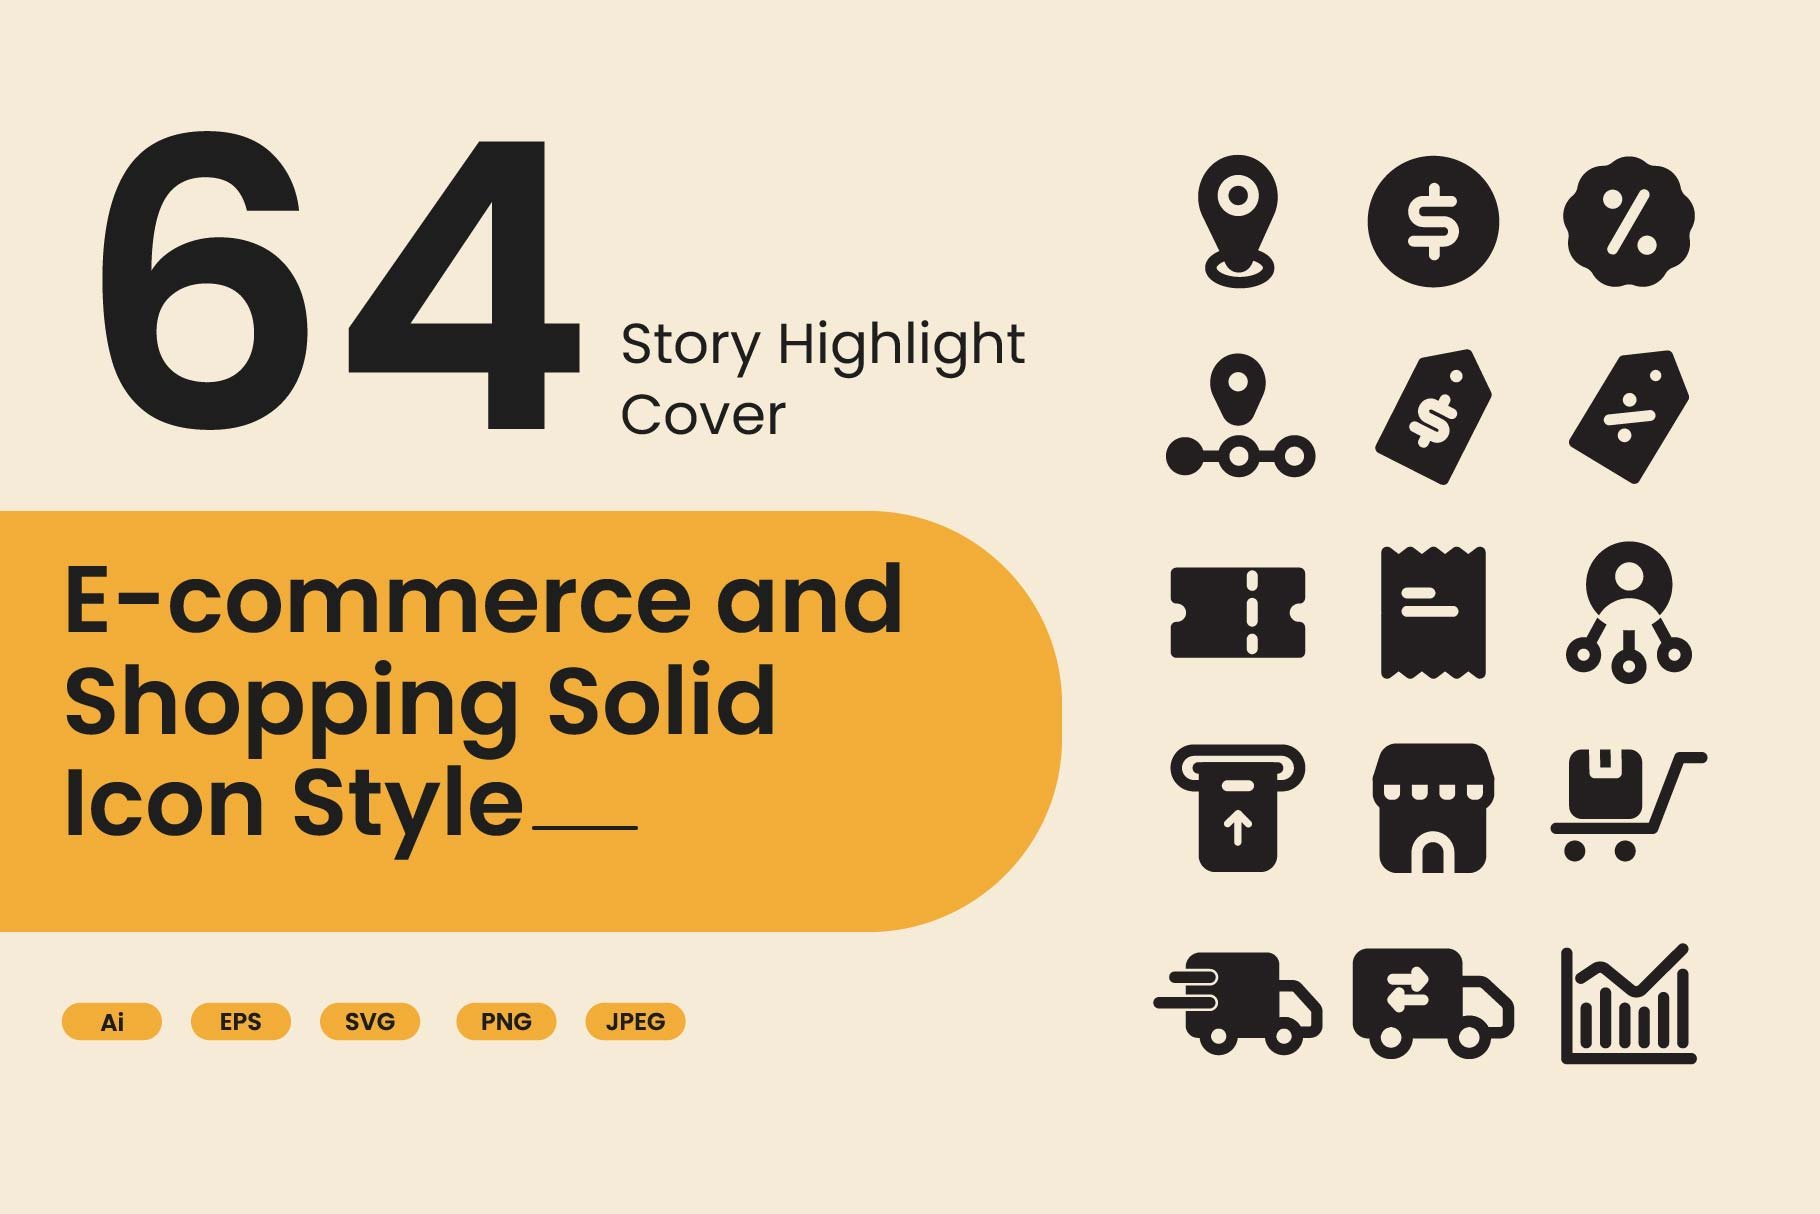 E-commerce Solid Icon Style cover image.